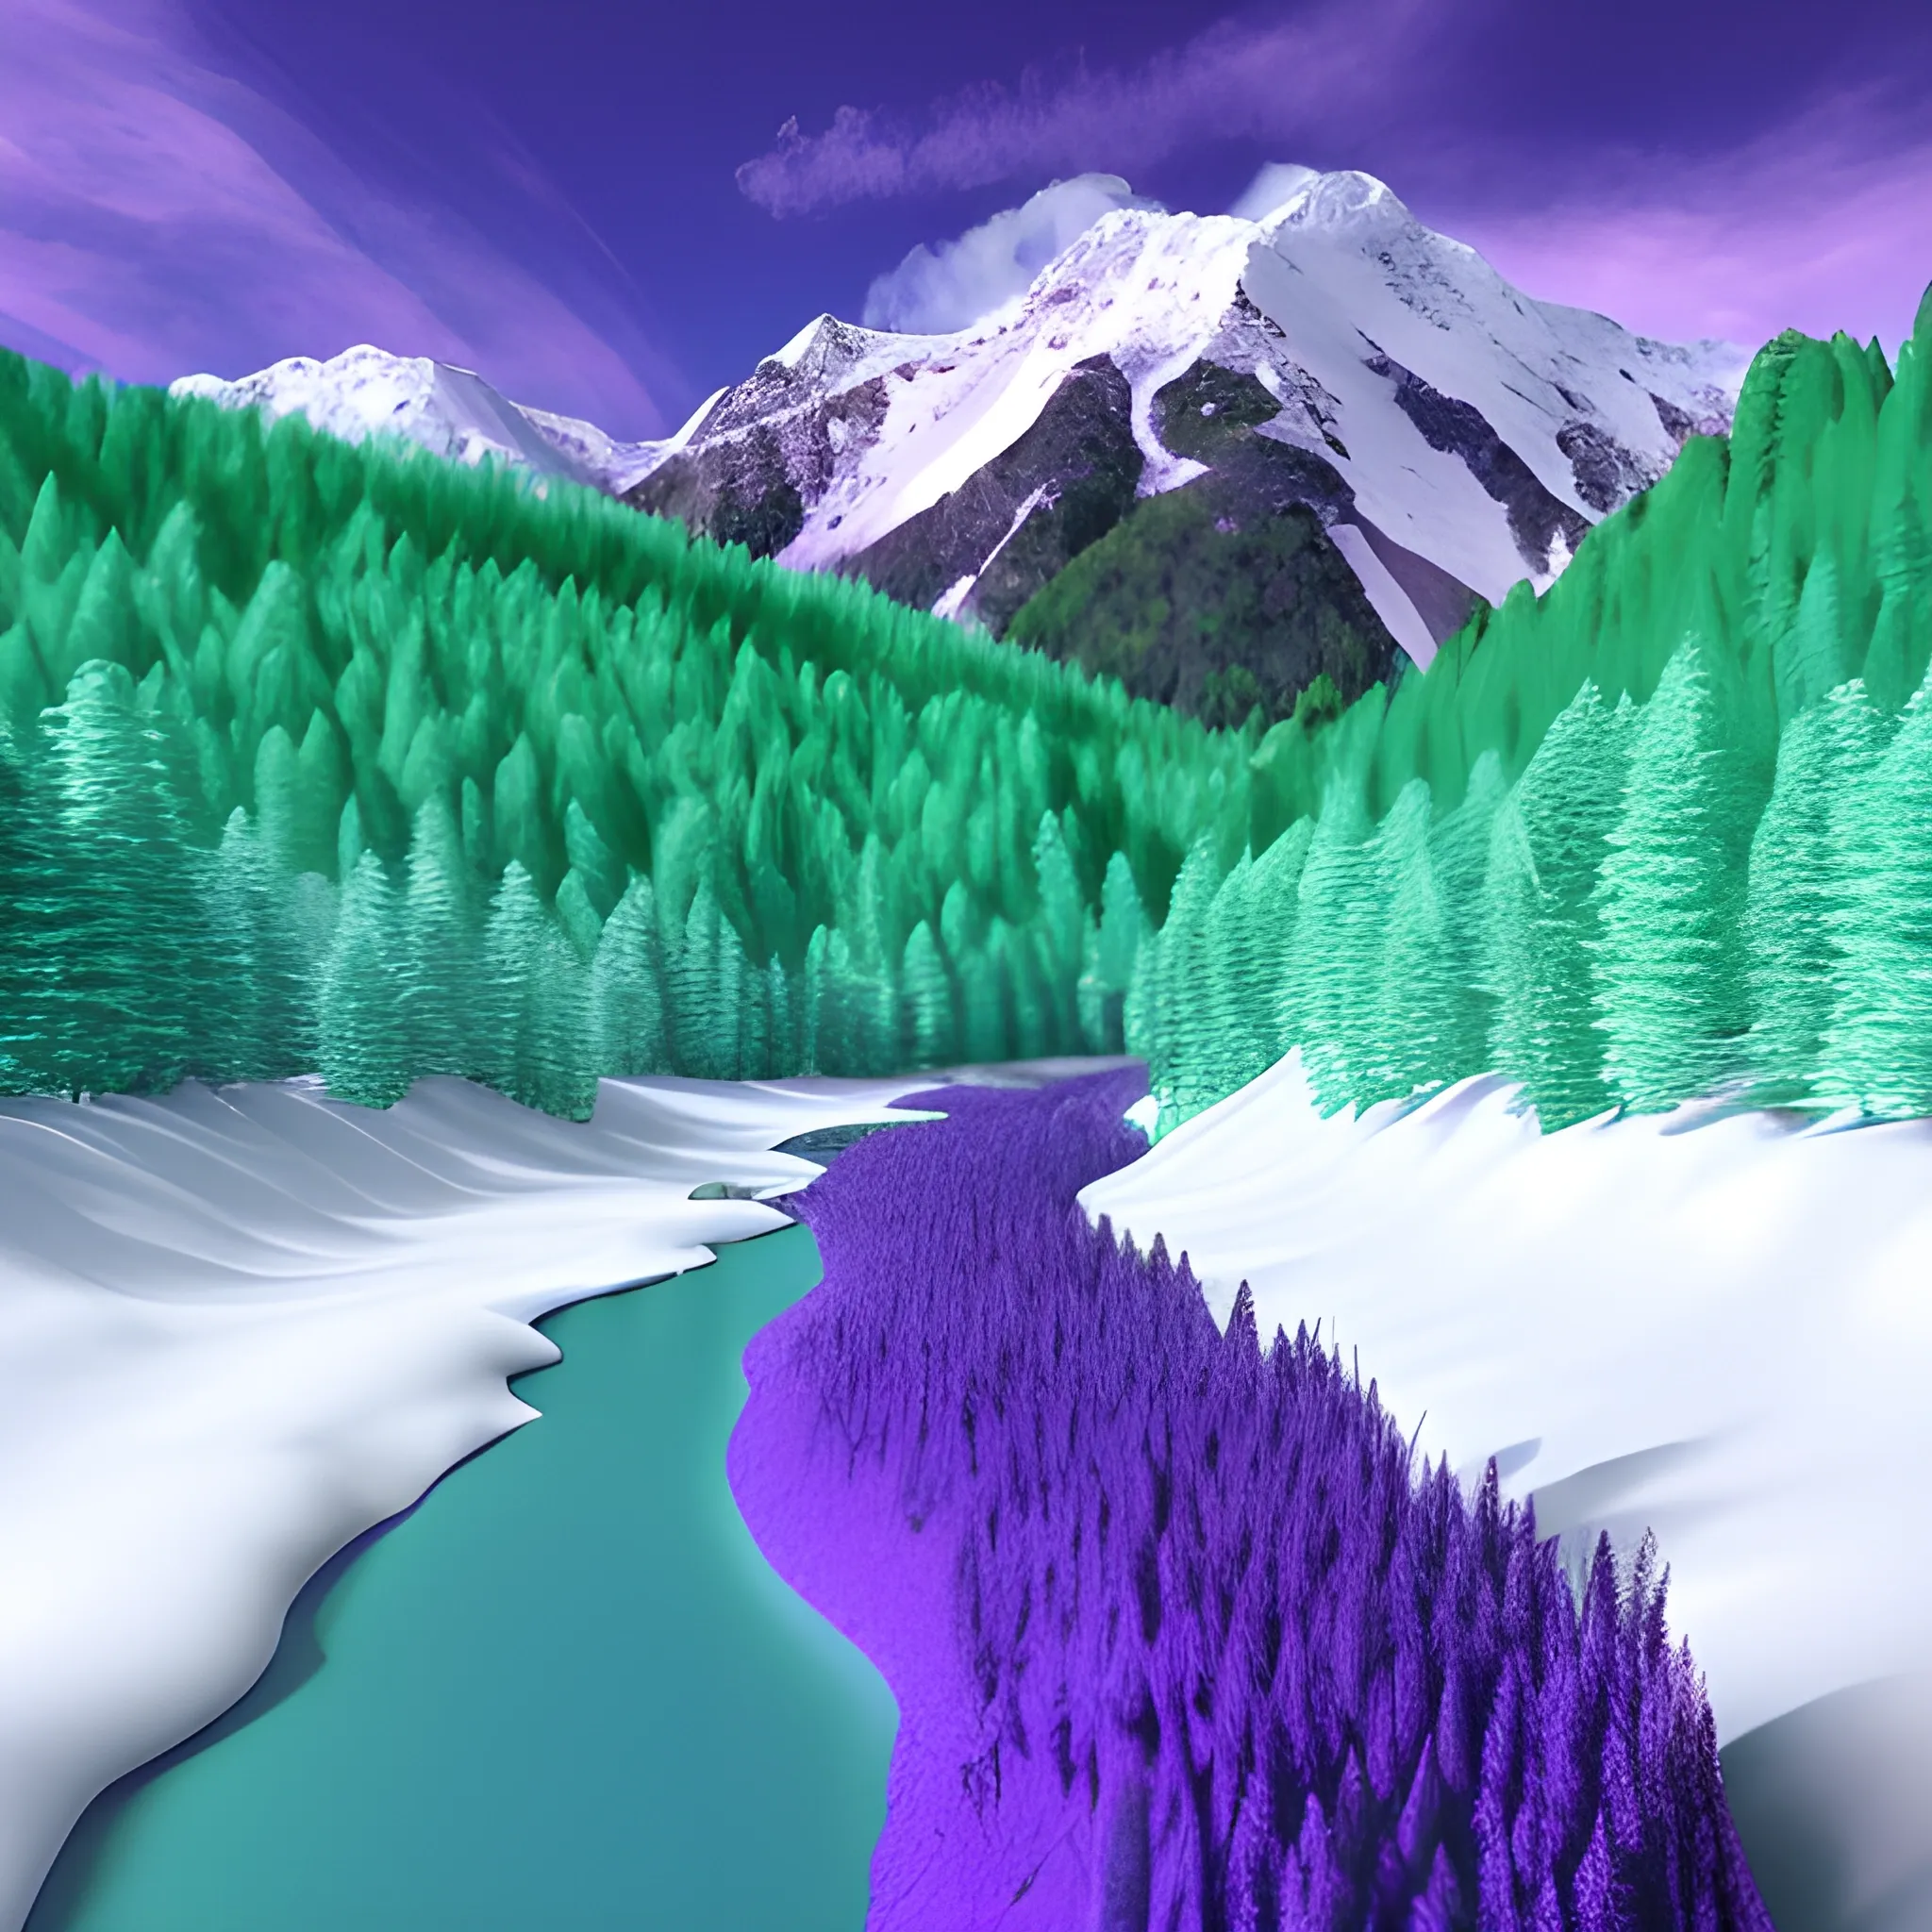 birds are flying, the mountains are covered with bright green trees and snow, a blue-purple river flows near the mountains, 3D, Trippy, 3D